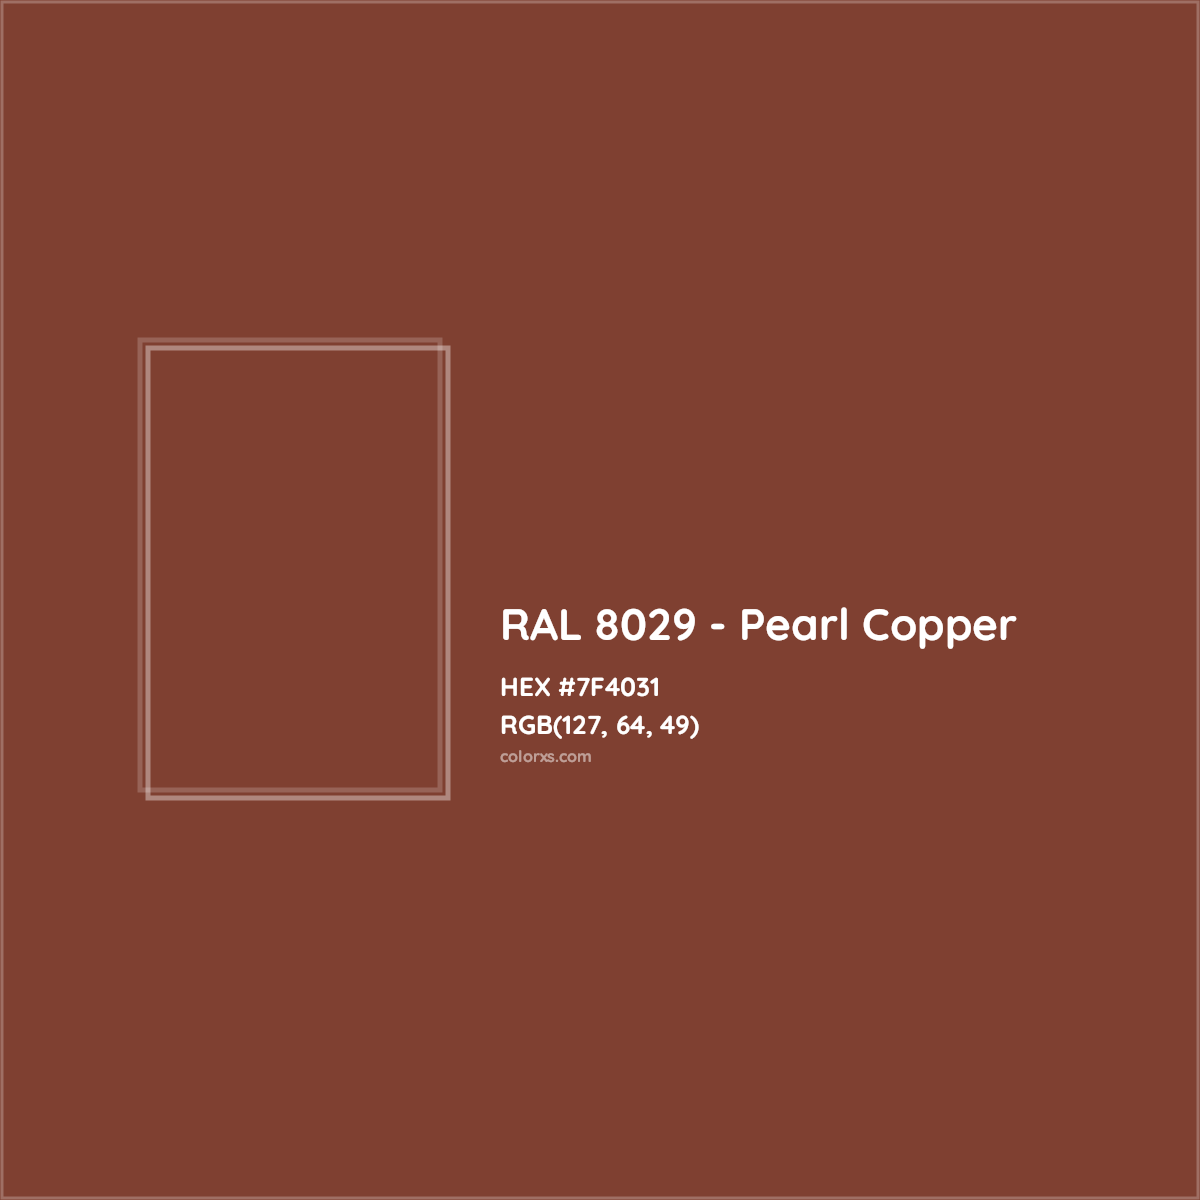 HEX #7F4031 RAL 8029 - Pearl Copper CMS RAL Classic - Color Code